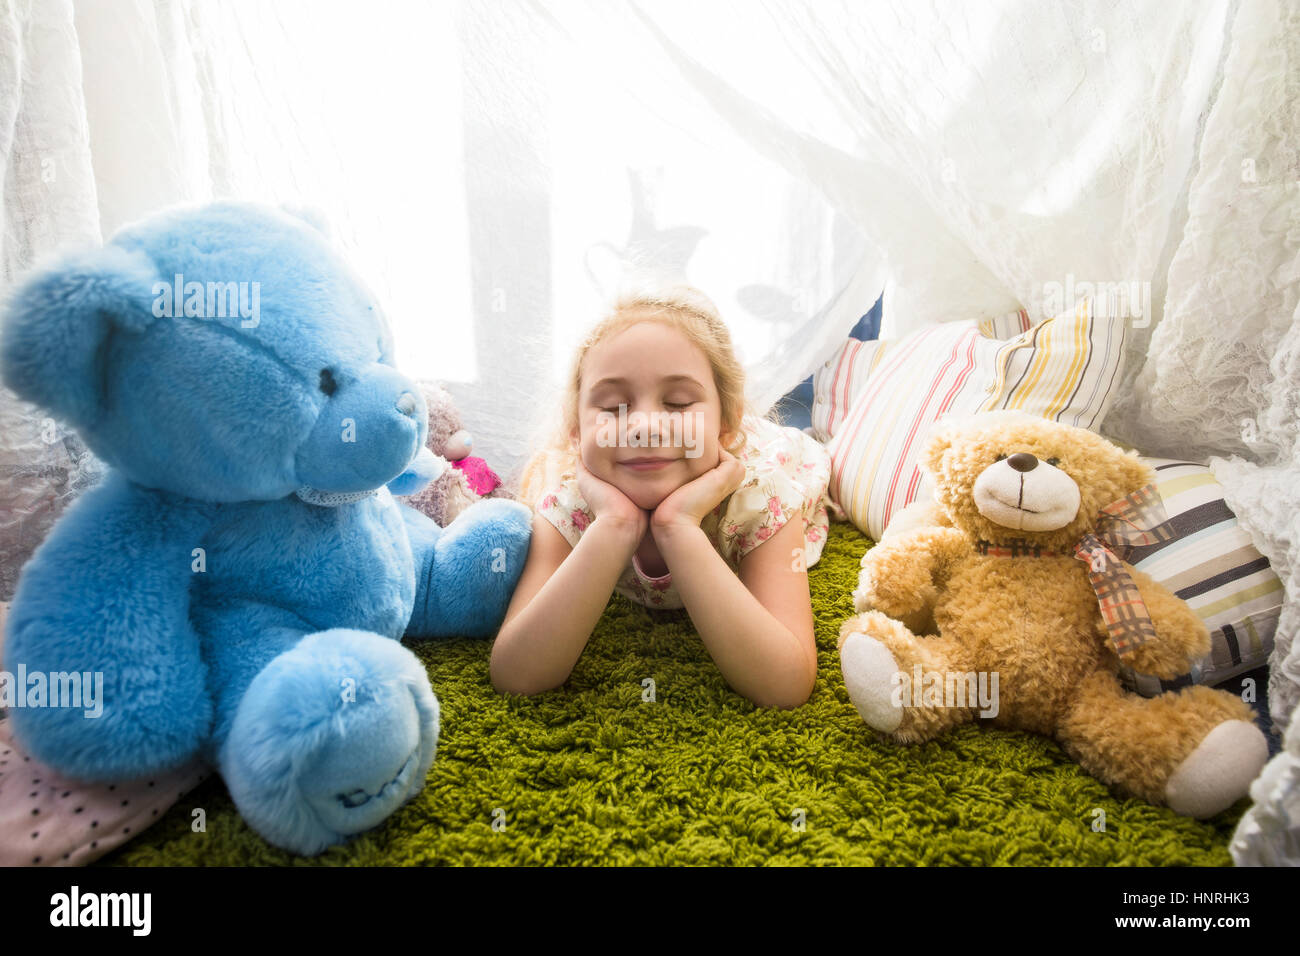 Little blonde child girl playing at home in her room with teddy bears Stock Photo